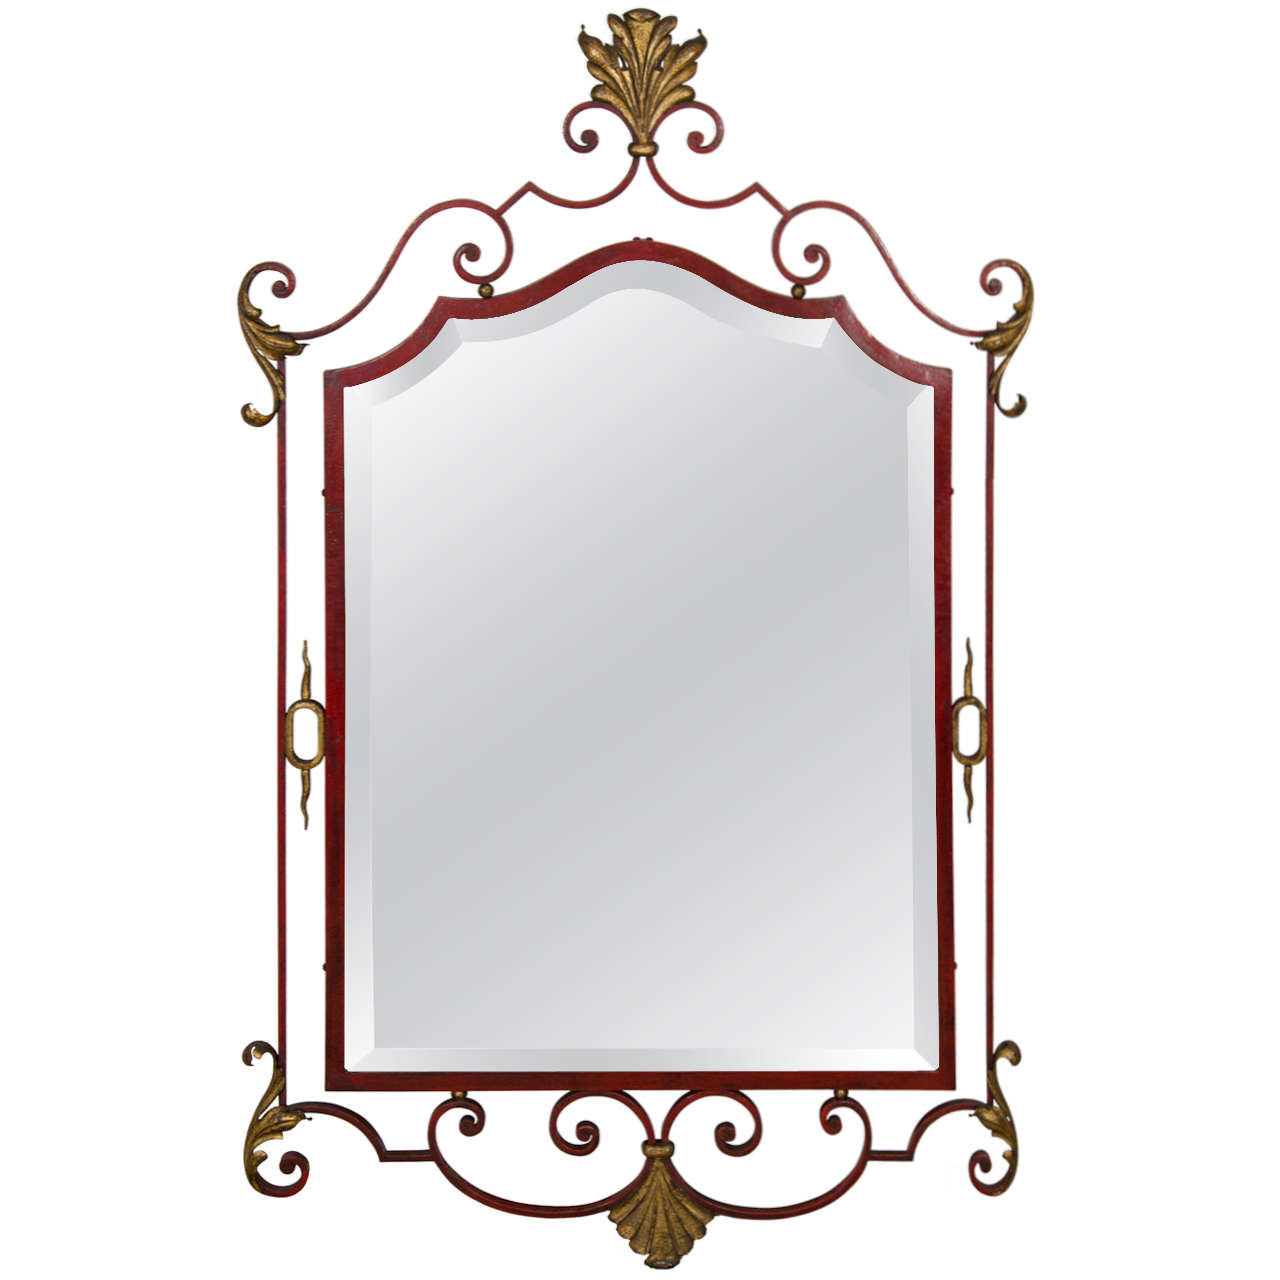 Red and Gold Mirror